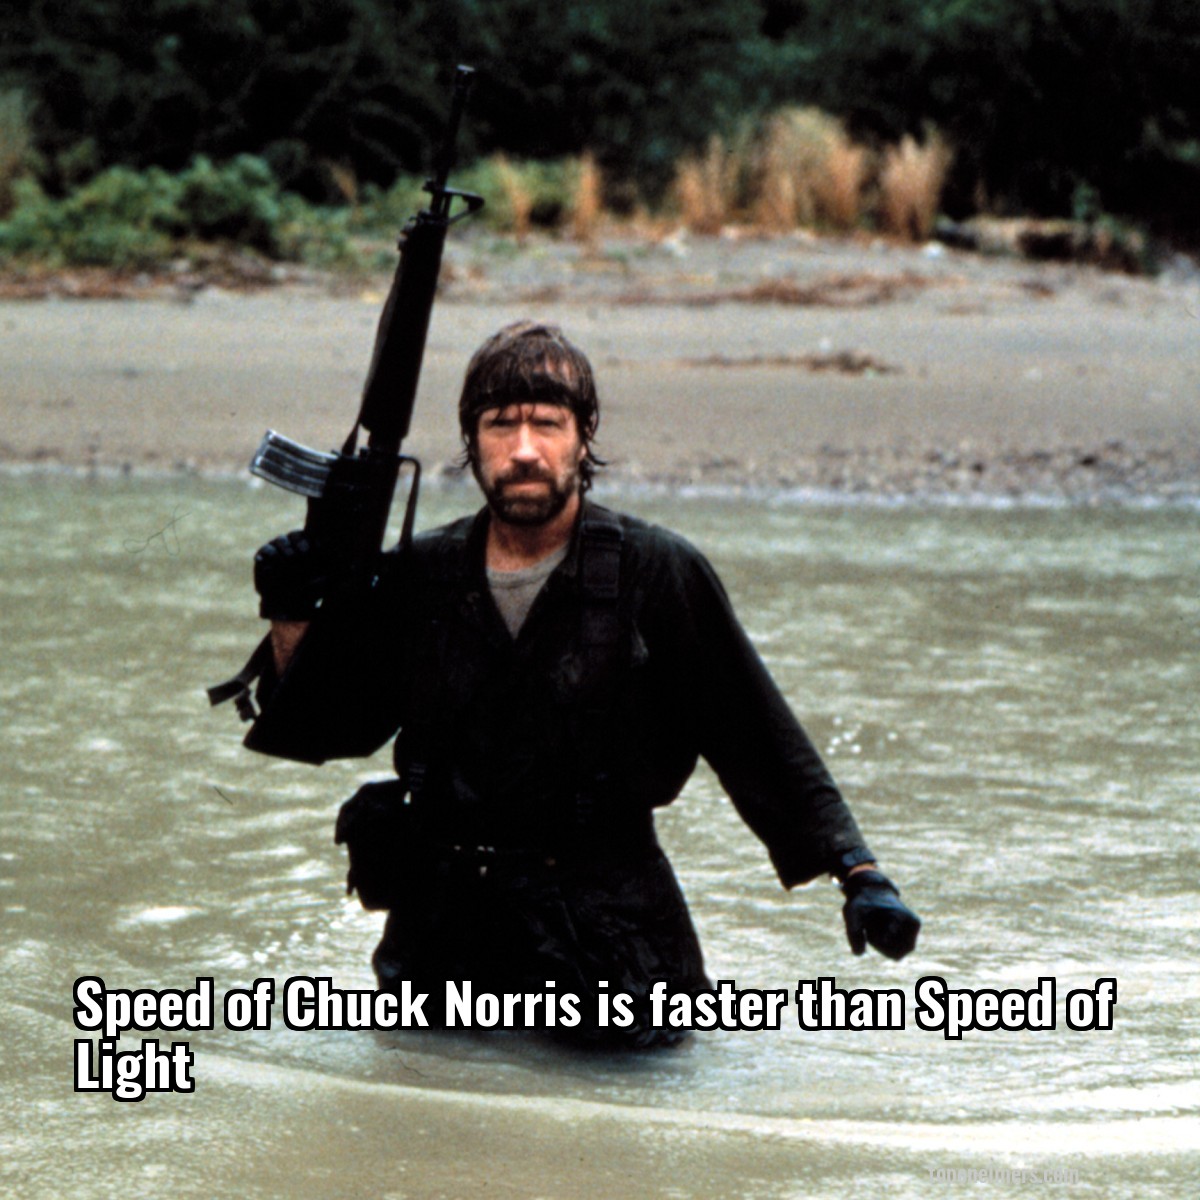 Speed of Chuck Norris is faster than Speed of Light